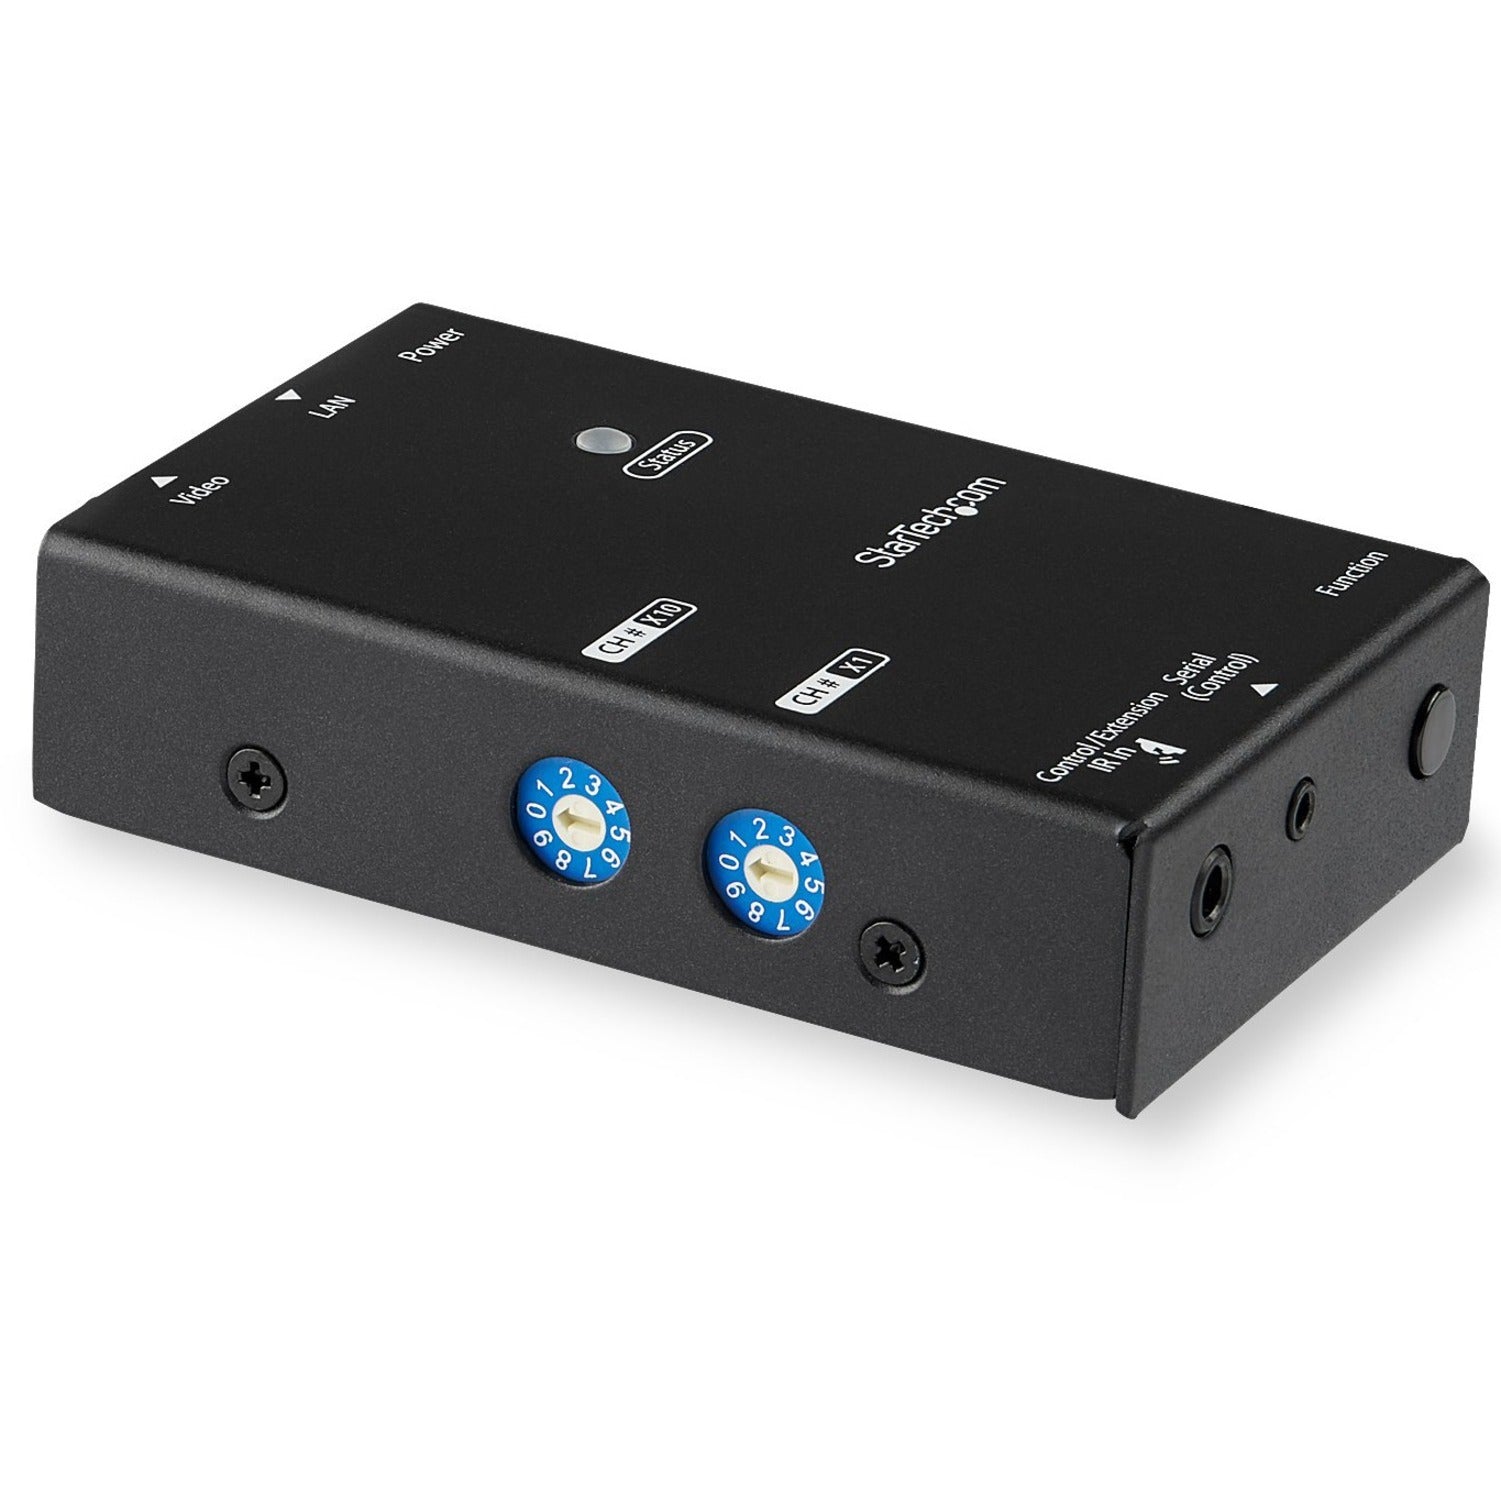 StarTech.com ST12MHDLNHR HDMI Over IP Receiver, Full HD Video Extender Receiver, 2 Year Warranty, TAA Compliant, USB, HDMI Out, Network (RJ-45), Category 6 Twisted Pair, 328.08 ft Operating Distance, Black